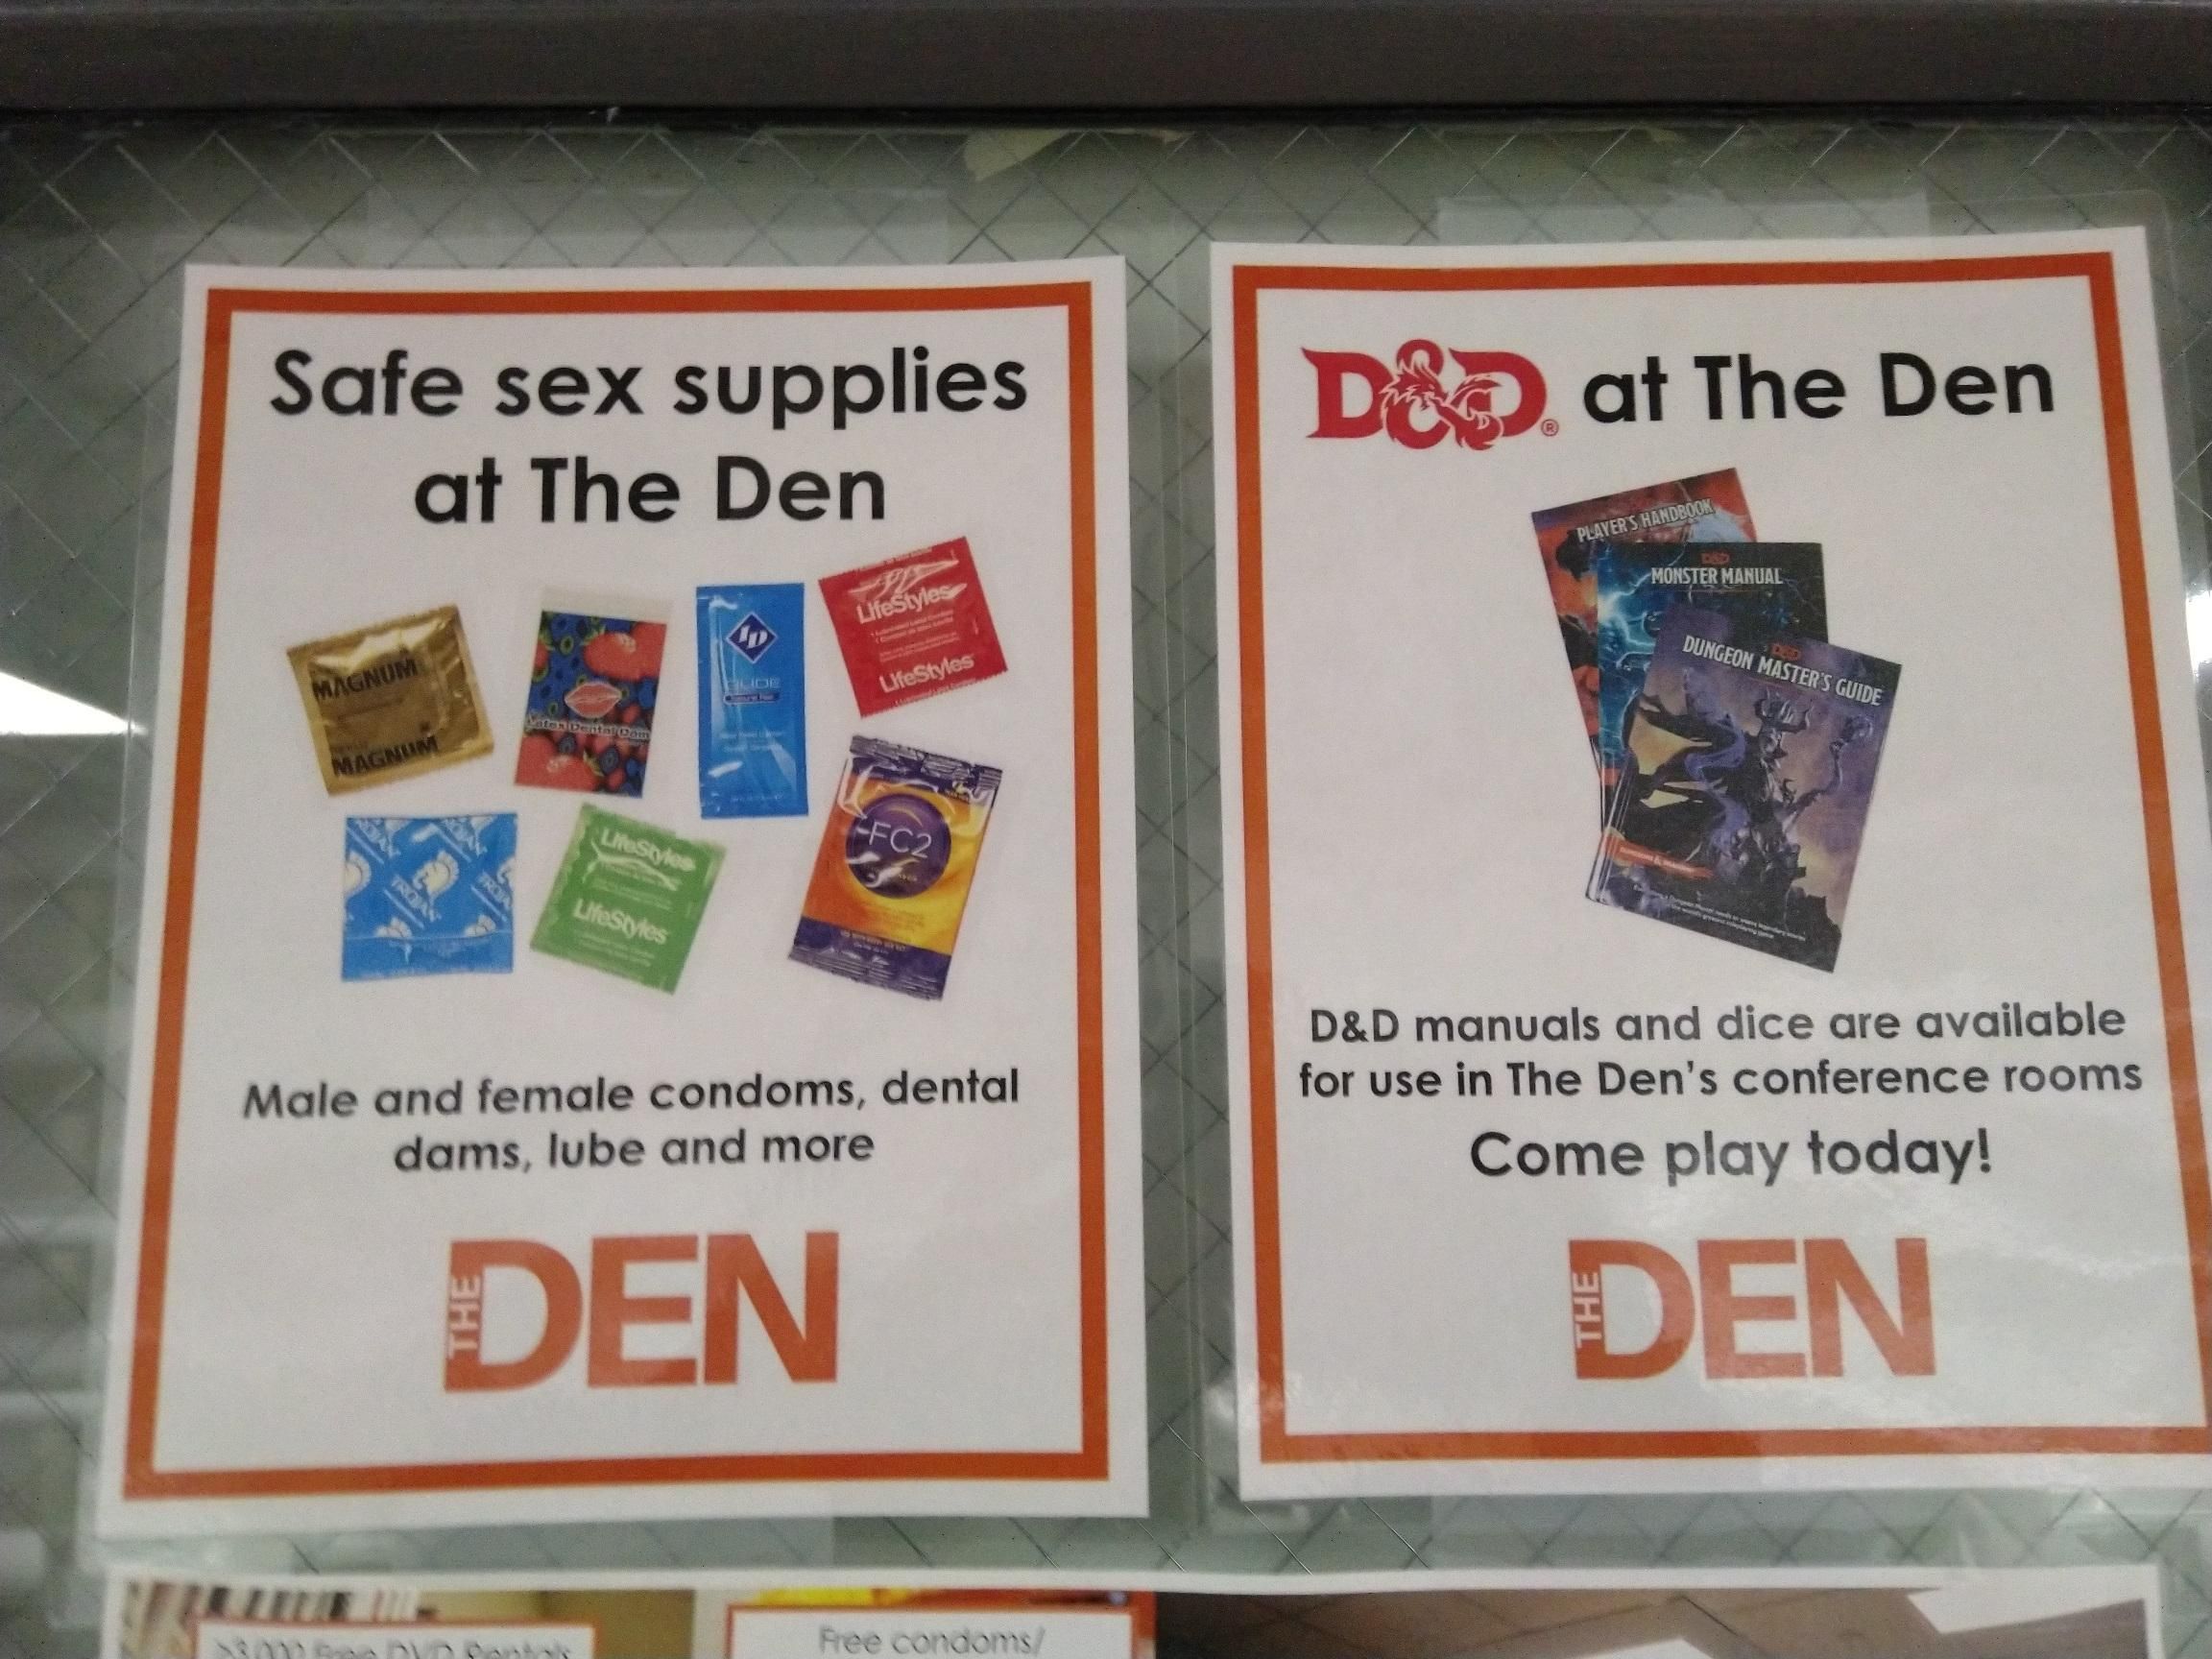 My school offers two different kinds of contraceptives